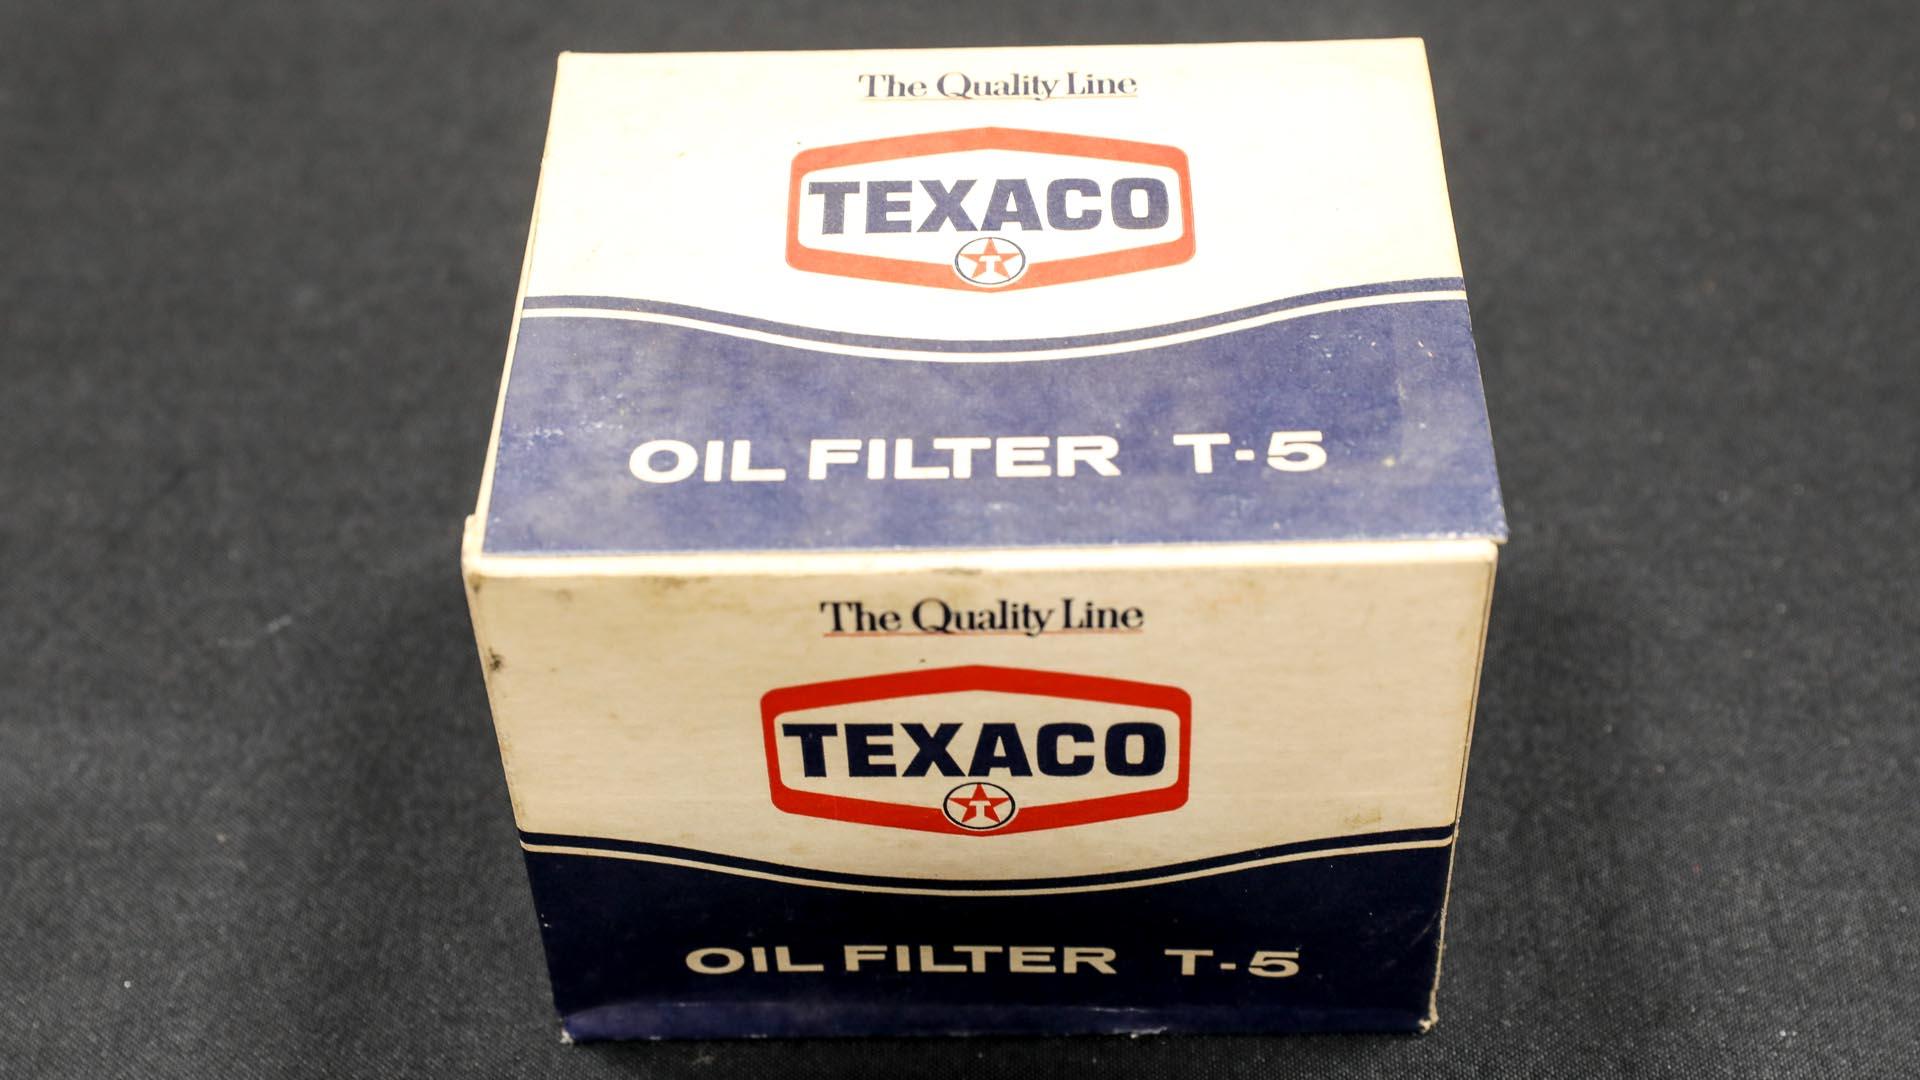 Large Collection of Texaco Related Memorabilia